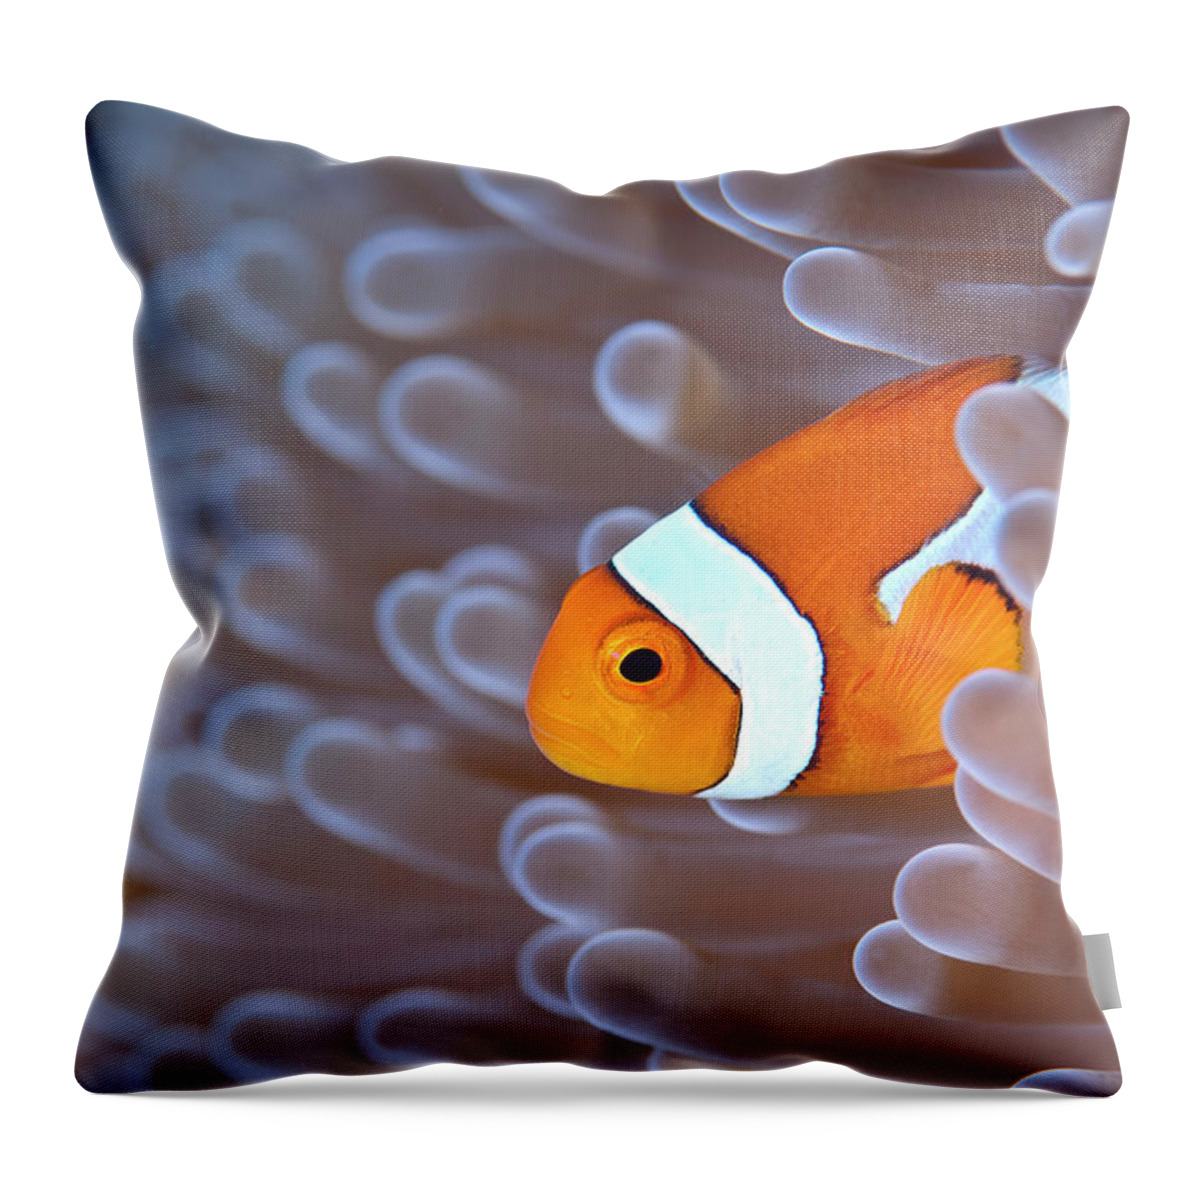 Underwater Throw Pillow featuring the photograph Clownfish In White Anemone by Alastair Pollock Photography